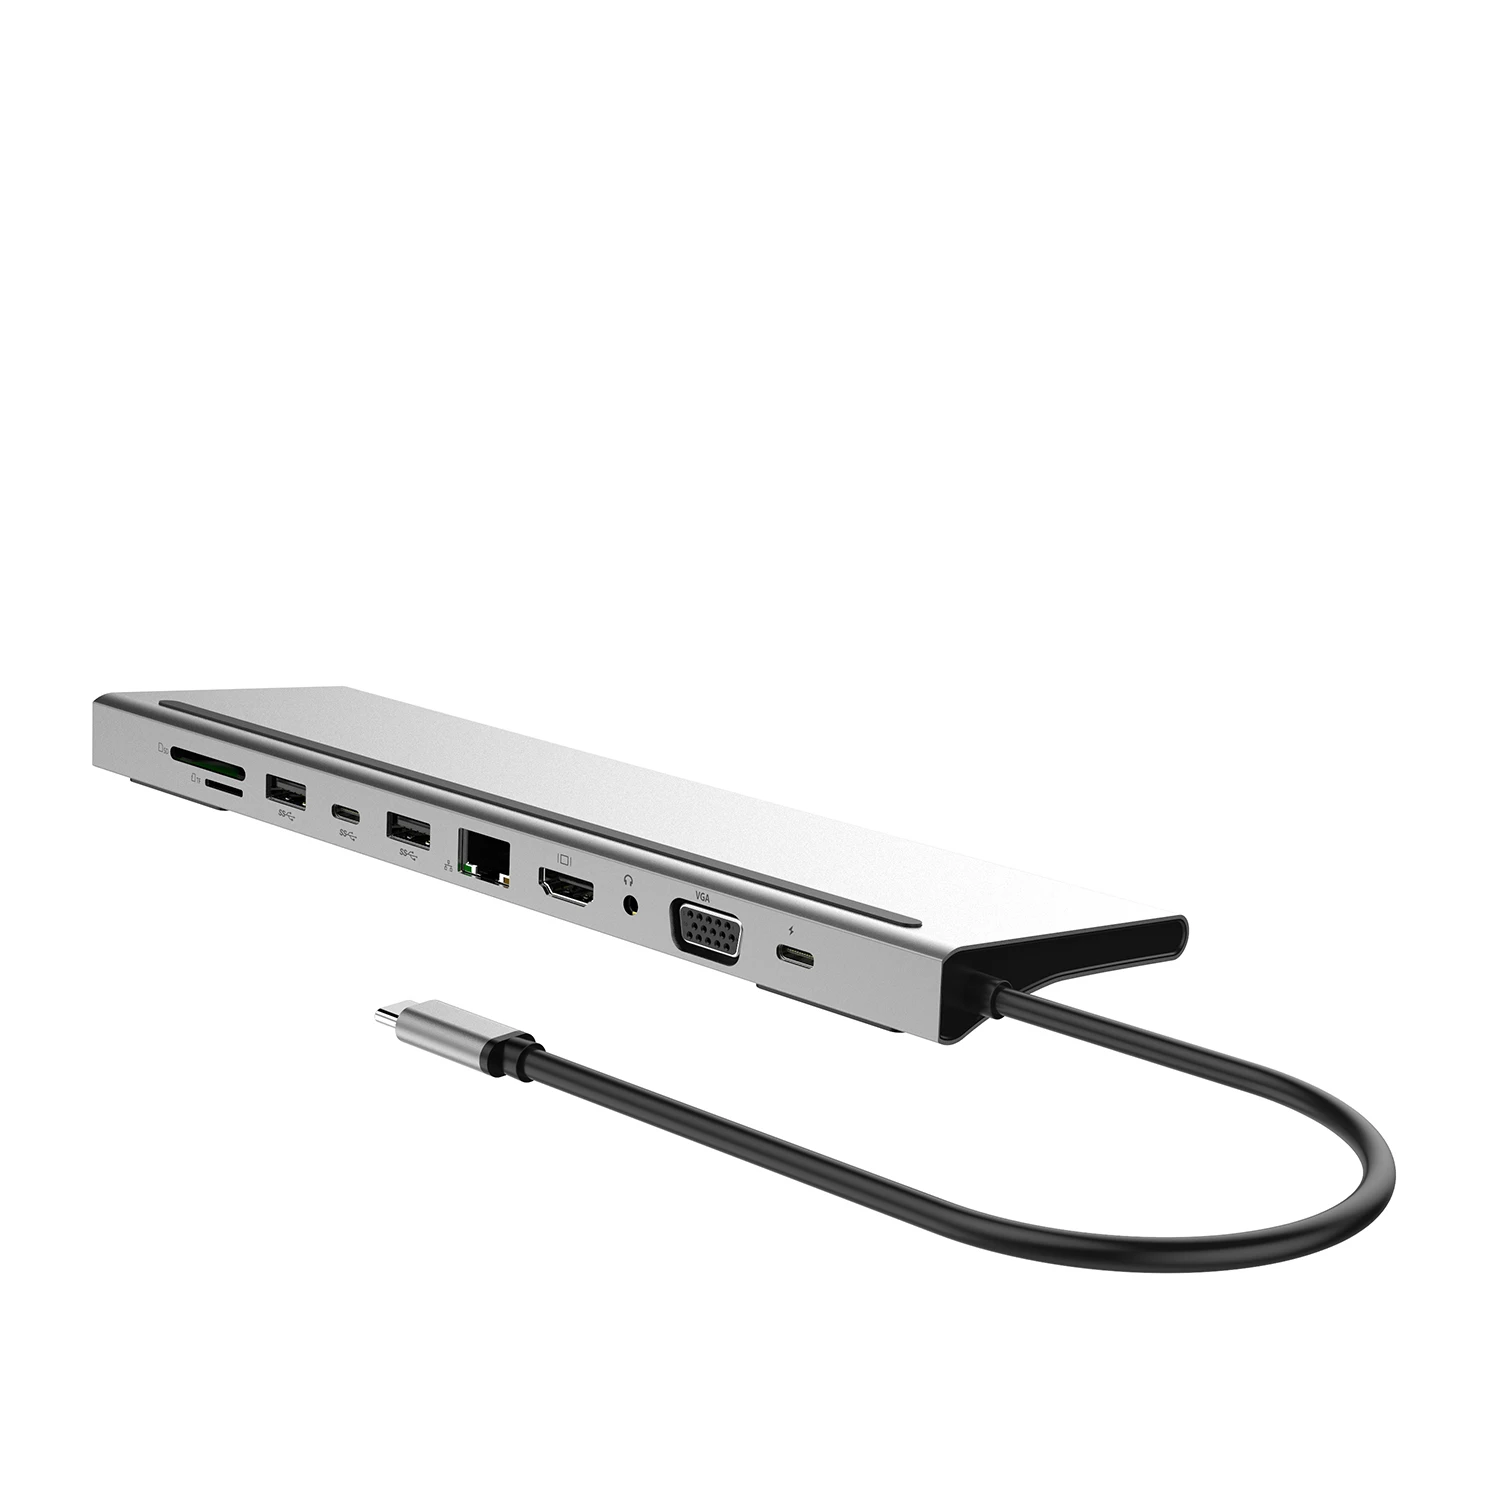 

11 in 1 Type c Hub Expansion Dock Laptop Docking Station VGA USB 3.0 RJ45 PD 3.5mm Audio all in one HDD USB Hub, Silver